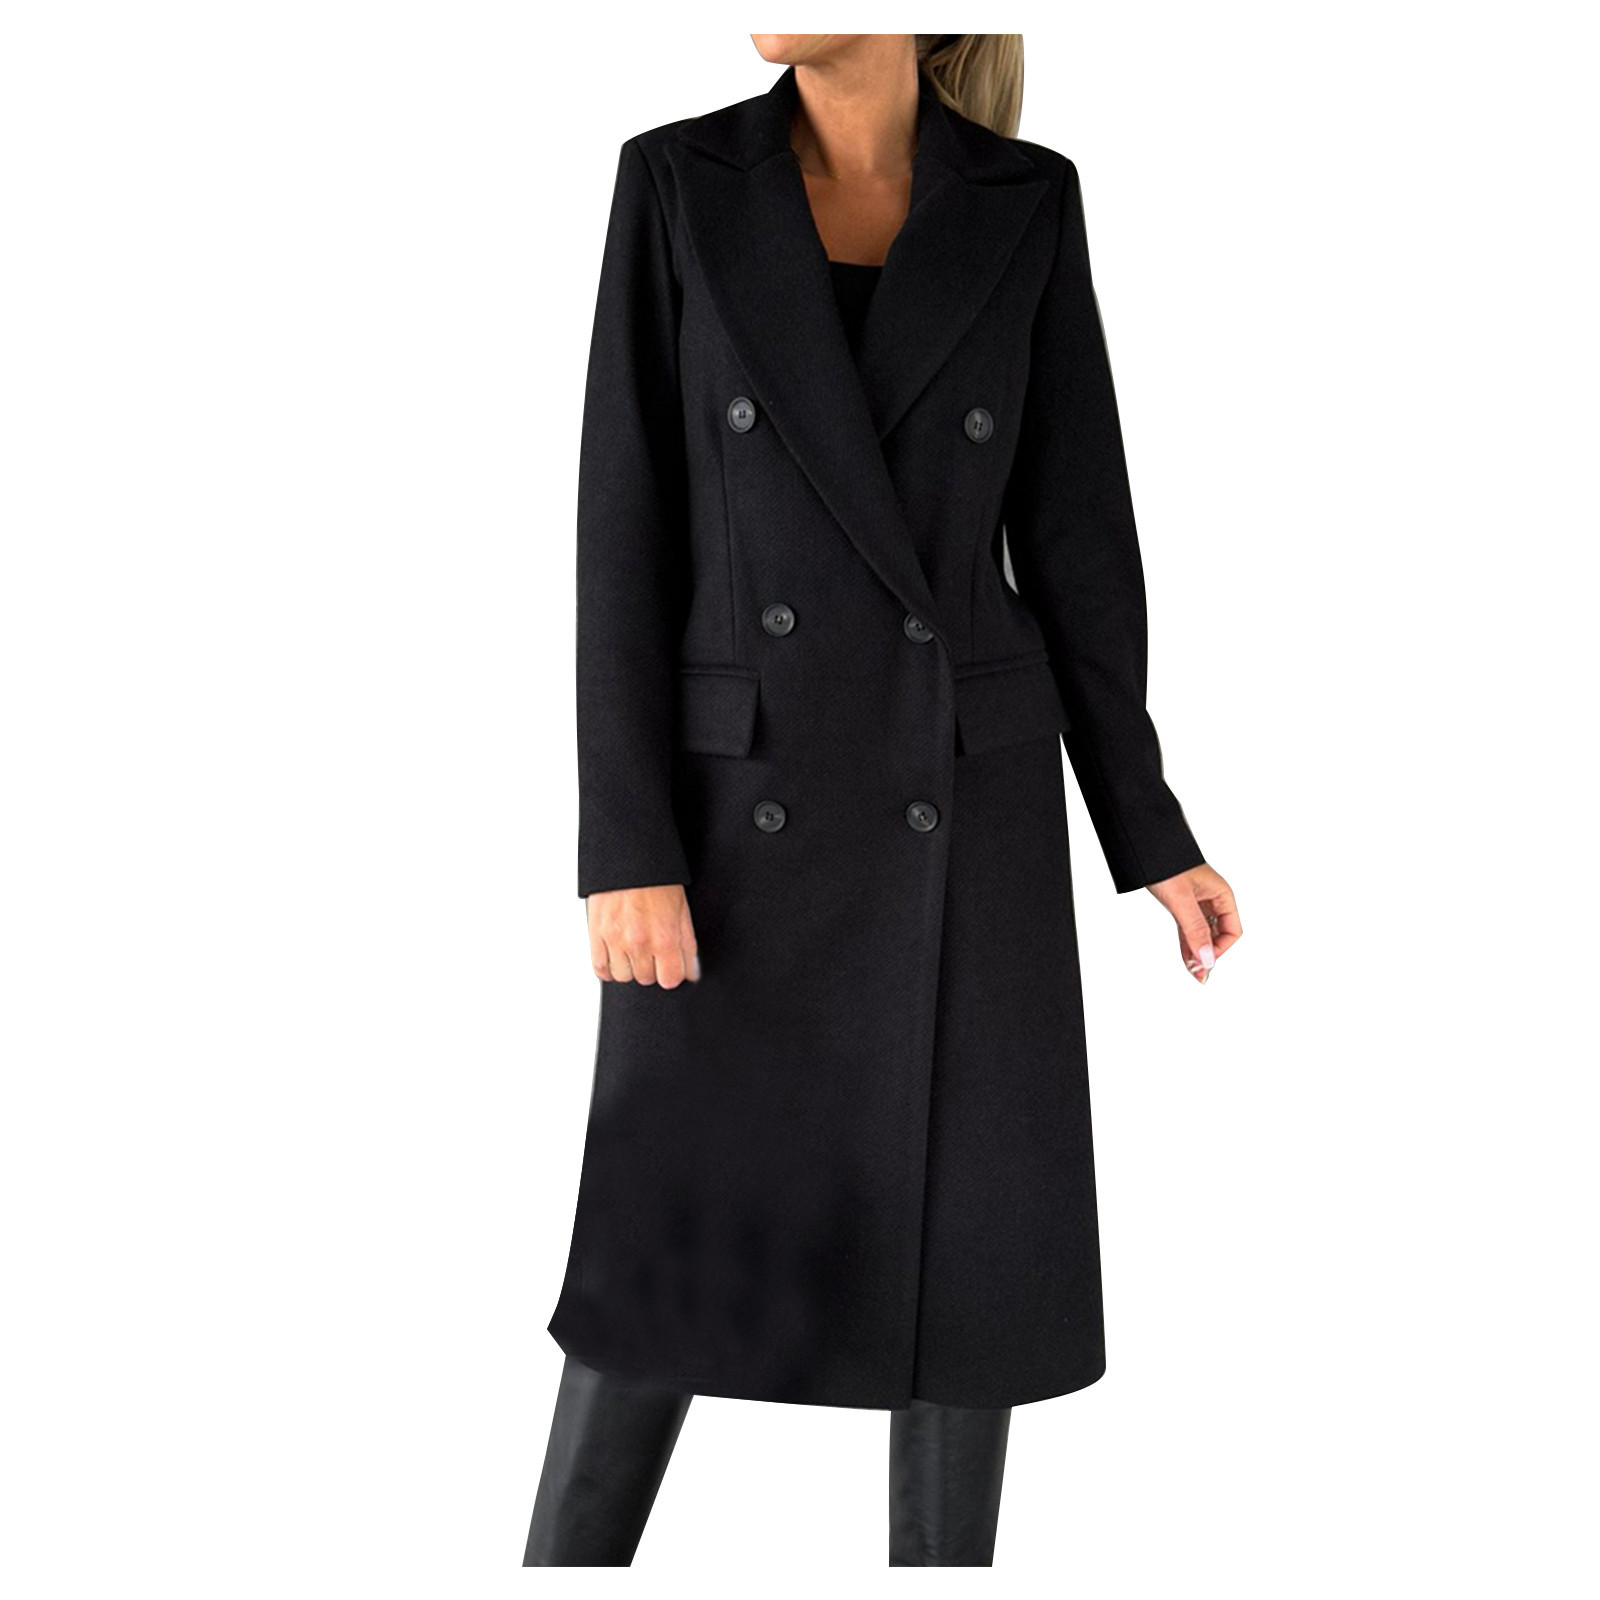 Hfyihgf Women's Double Breasted Trench Coat Classic Notch Collar Long Sleeve Peacoats Winter Warm Slim Fit Long Woolen Jackets Coat with Pockets Clearance(Black,M) - image 1 of 5